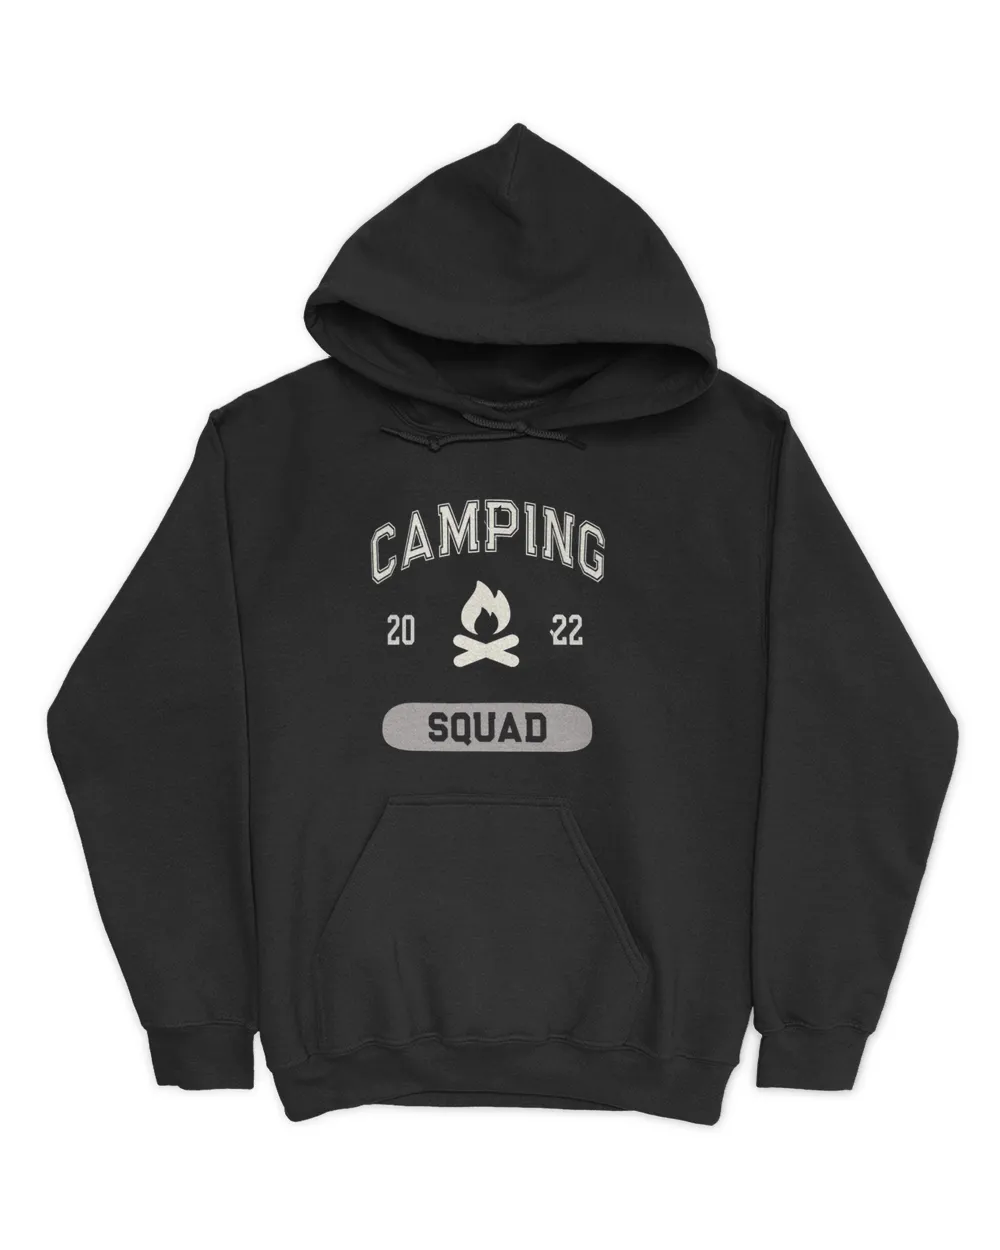 Camping Camp SQUAD Hiking Campfire Life King Camp Counselor Camper